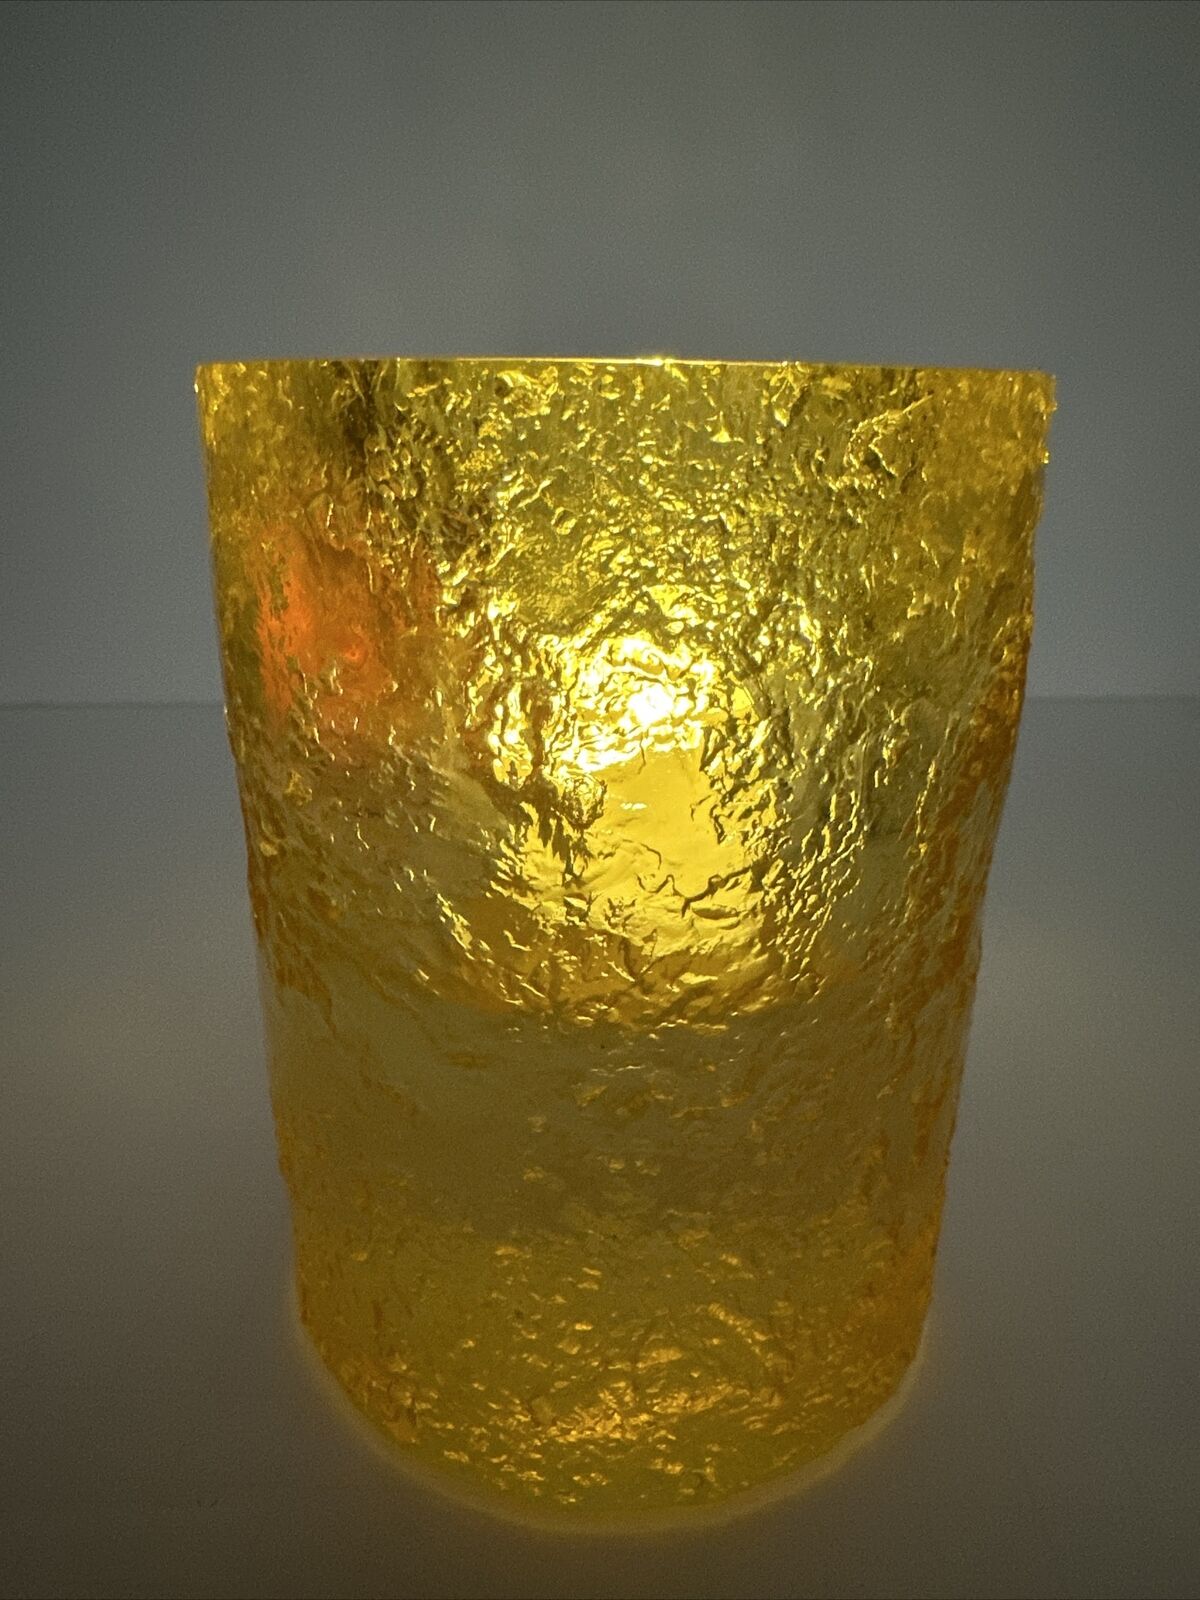 (1) Large Yellow Resin JI&O Candle Tealight Holder Textured Lucite Resin Vintage